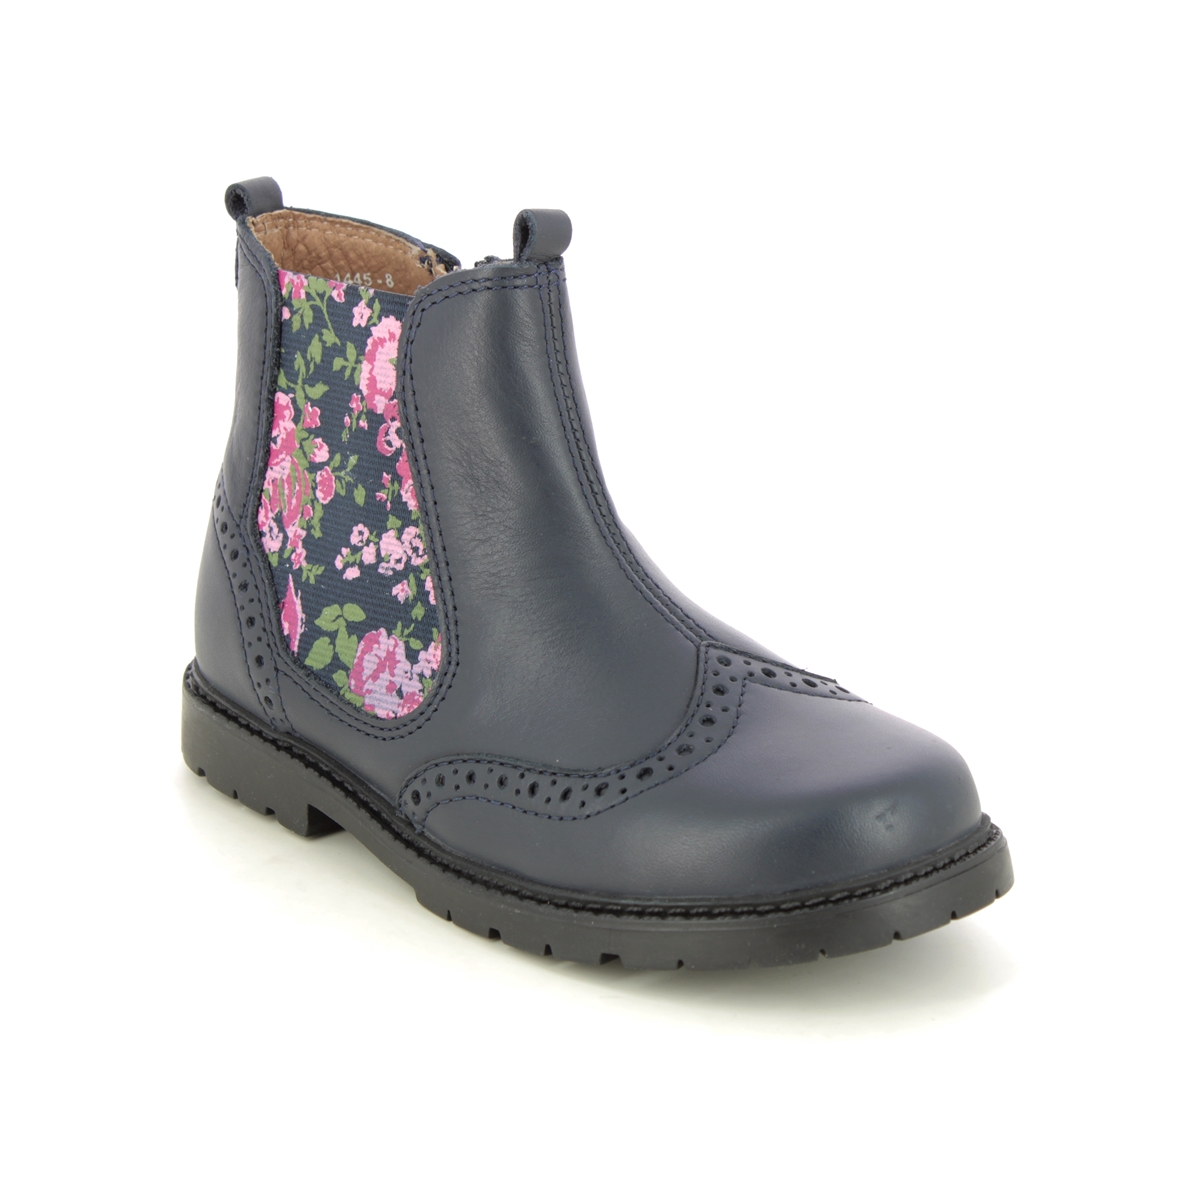 Start Rite Chelsea Navy leather Kids Girls Boots 1445-86F in a Plain Leather in Size 10.5